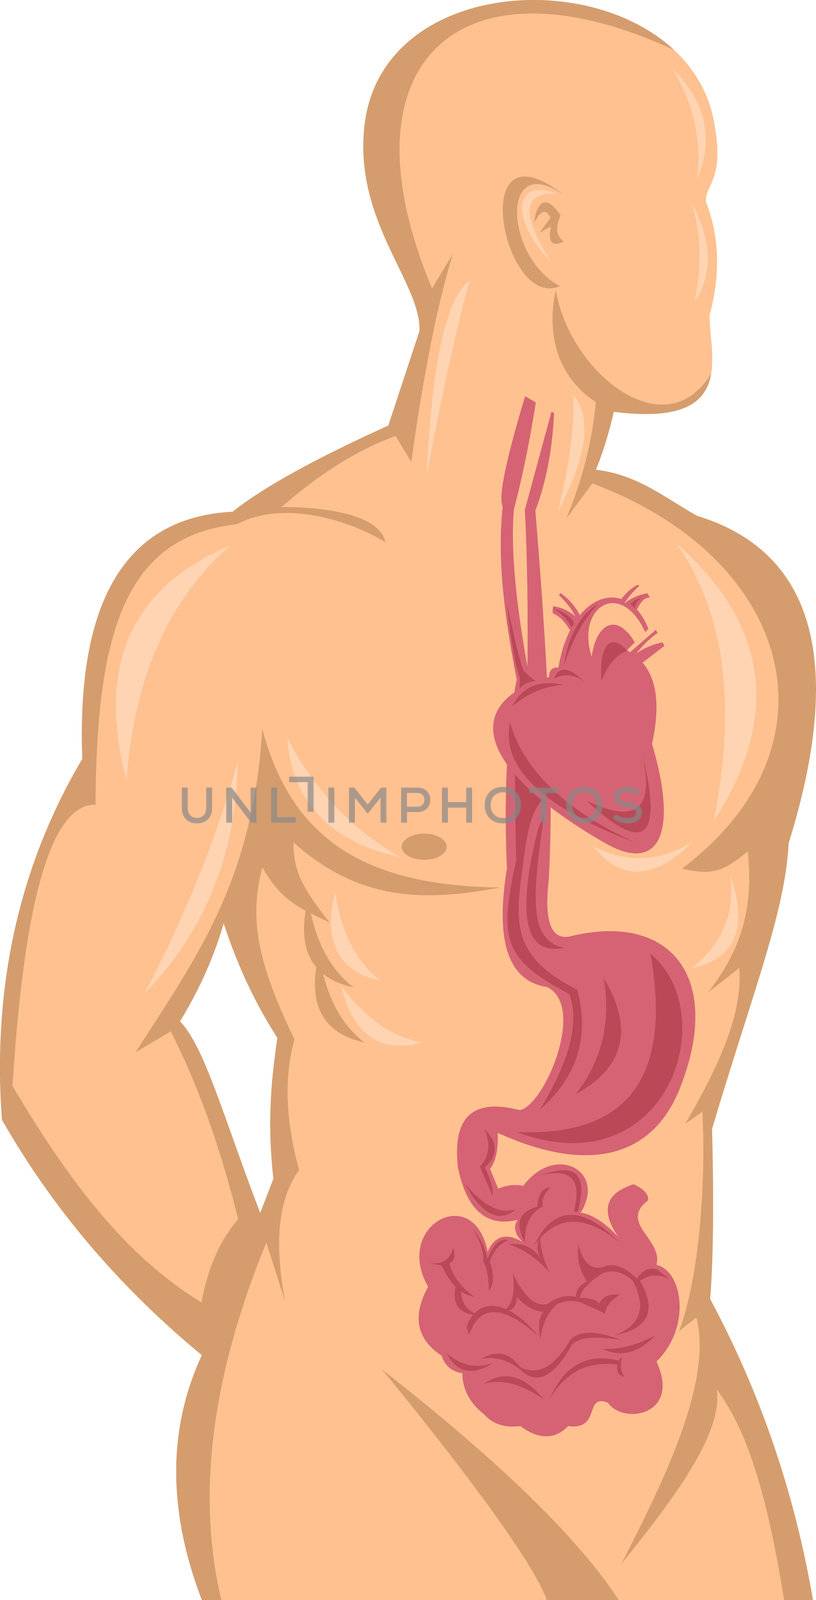  illustration of a Human anatomy showing heart,stomach,intestine and digestive system isolated on white background.